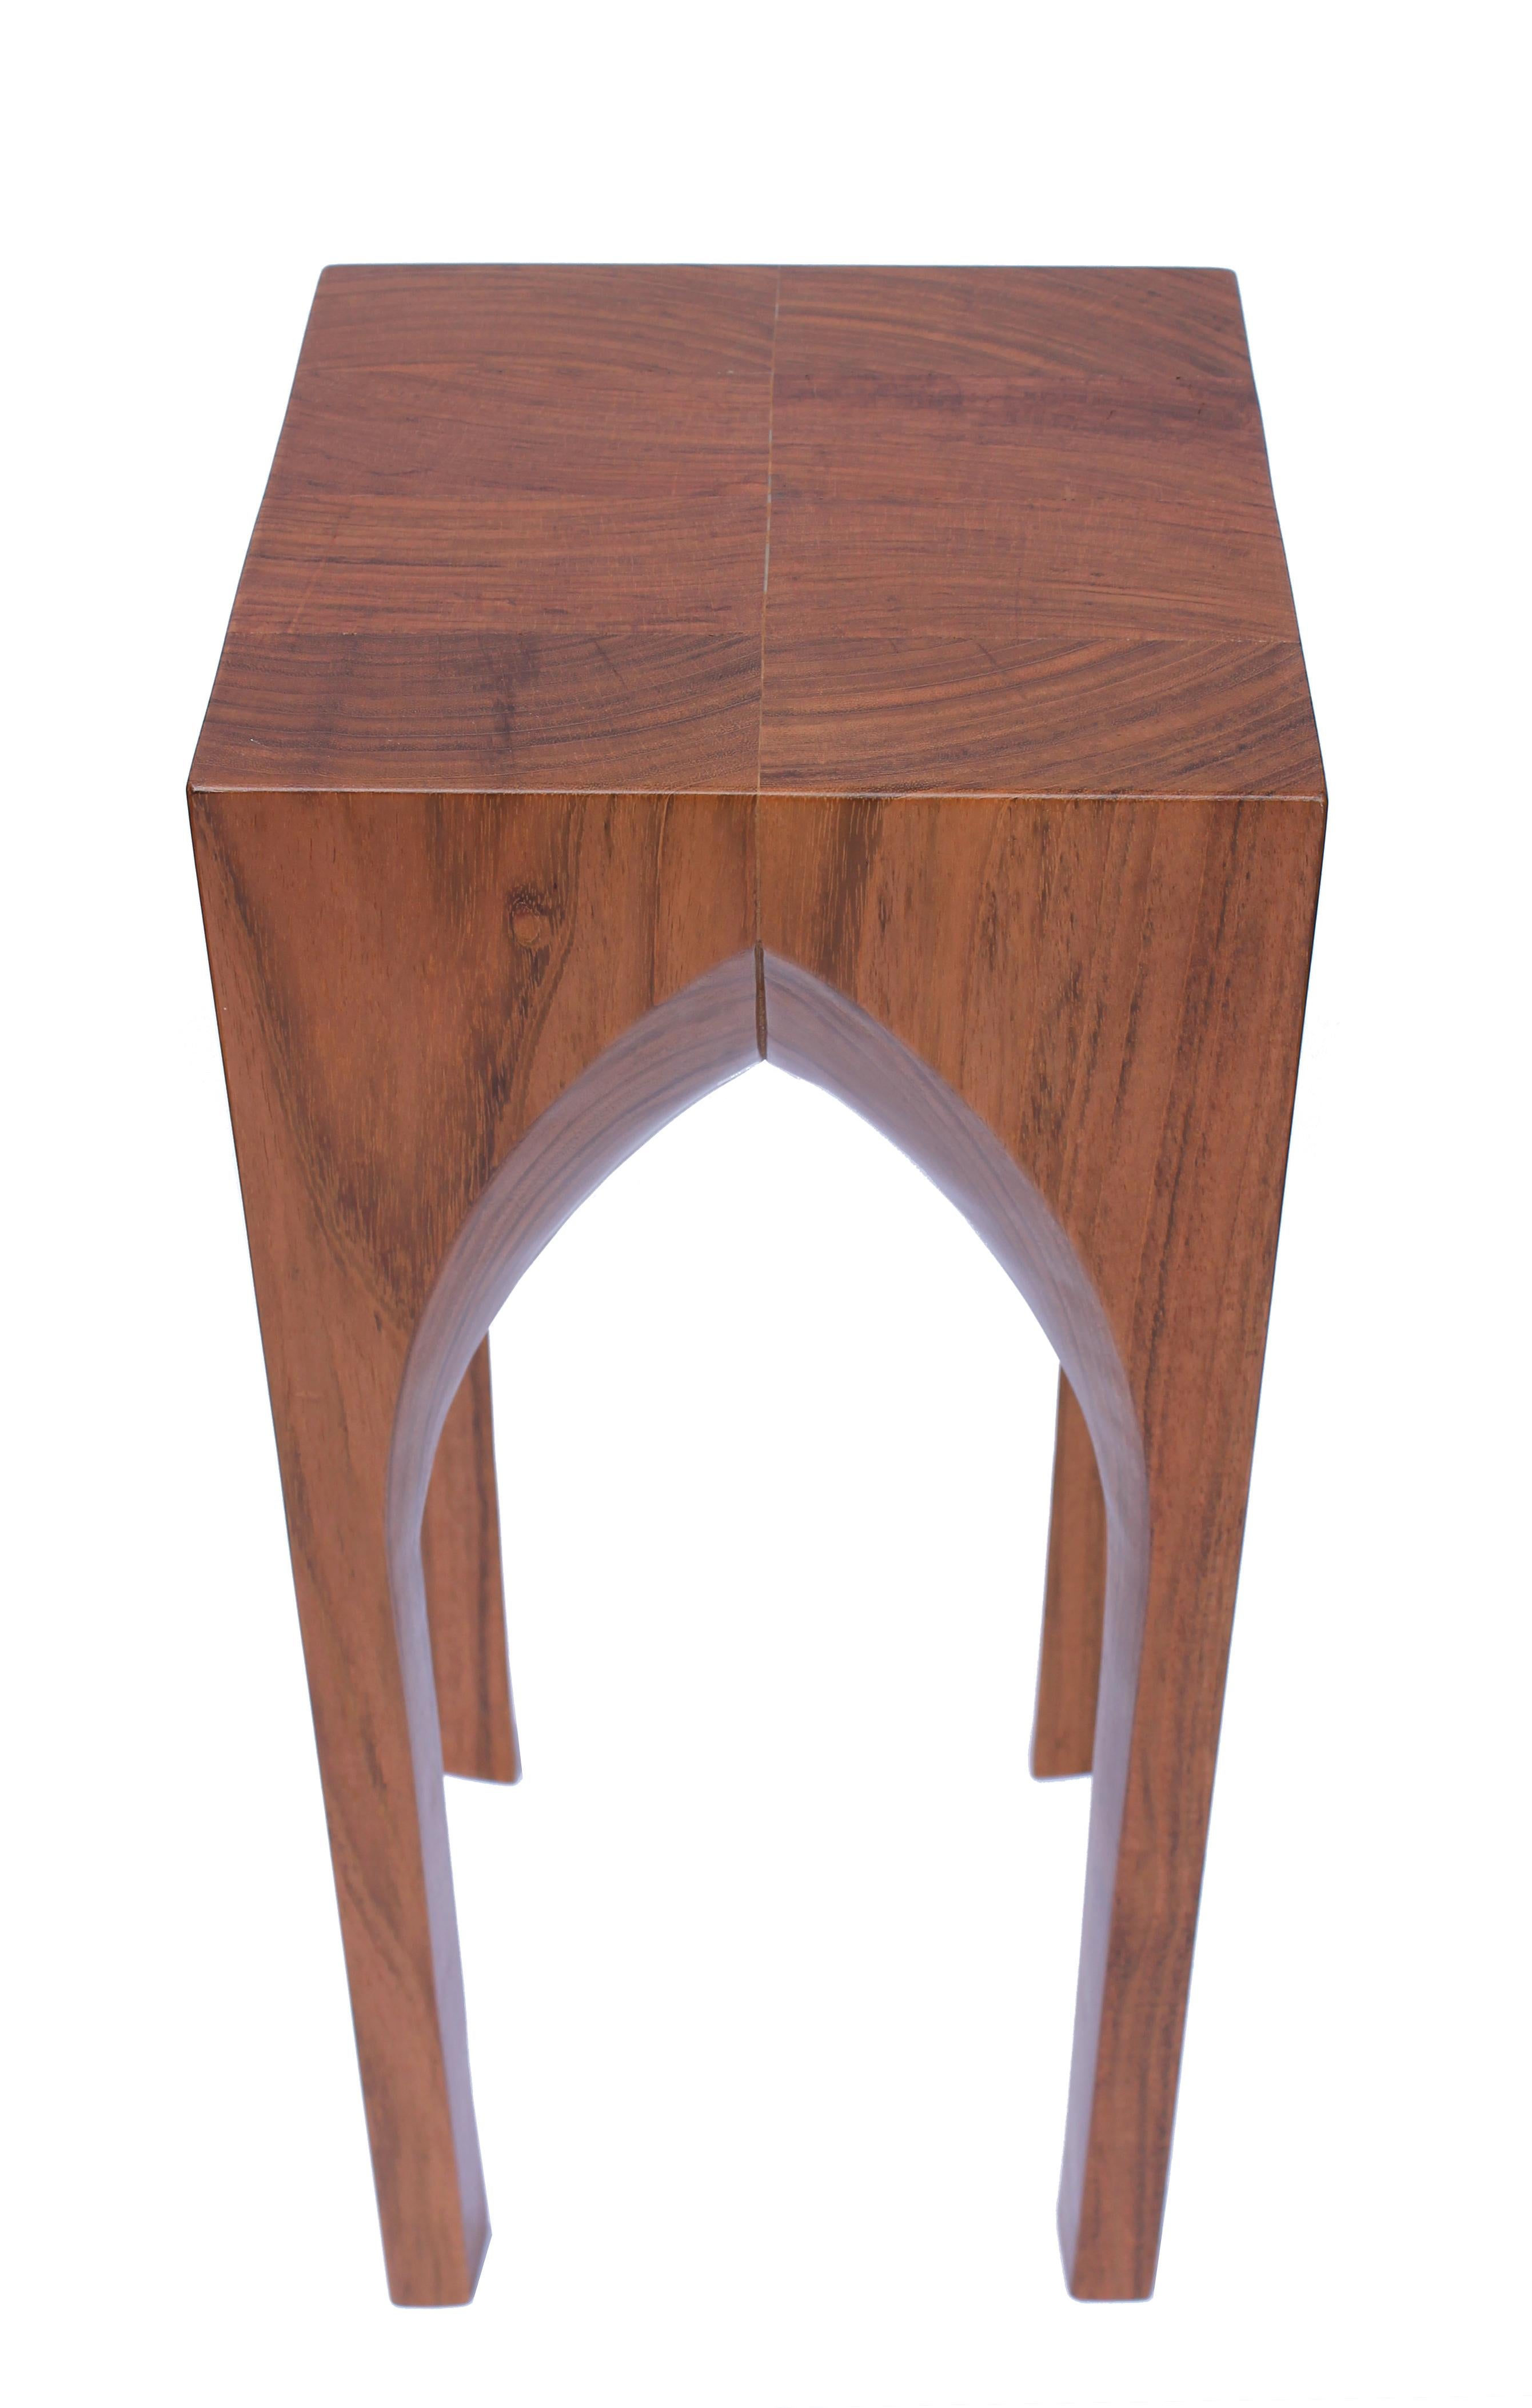 Modern Arch Side Table - Pointed Arch (Jatobá wood) For Sale